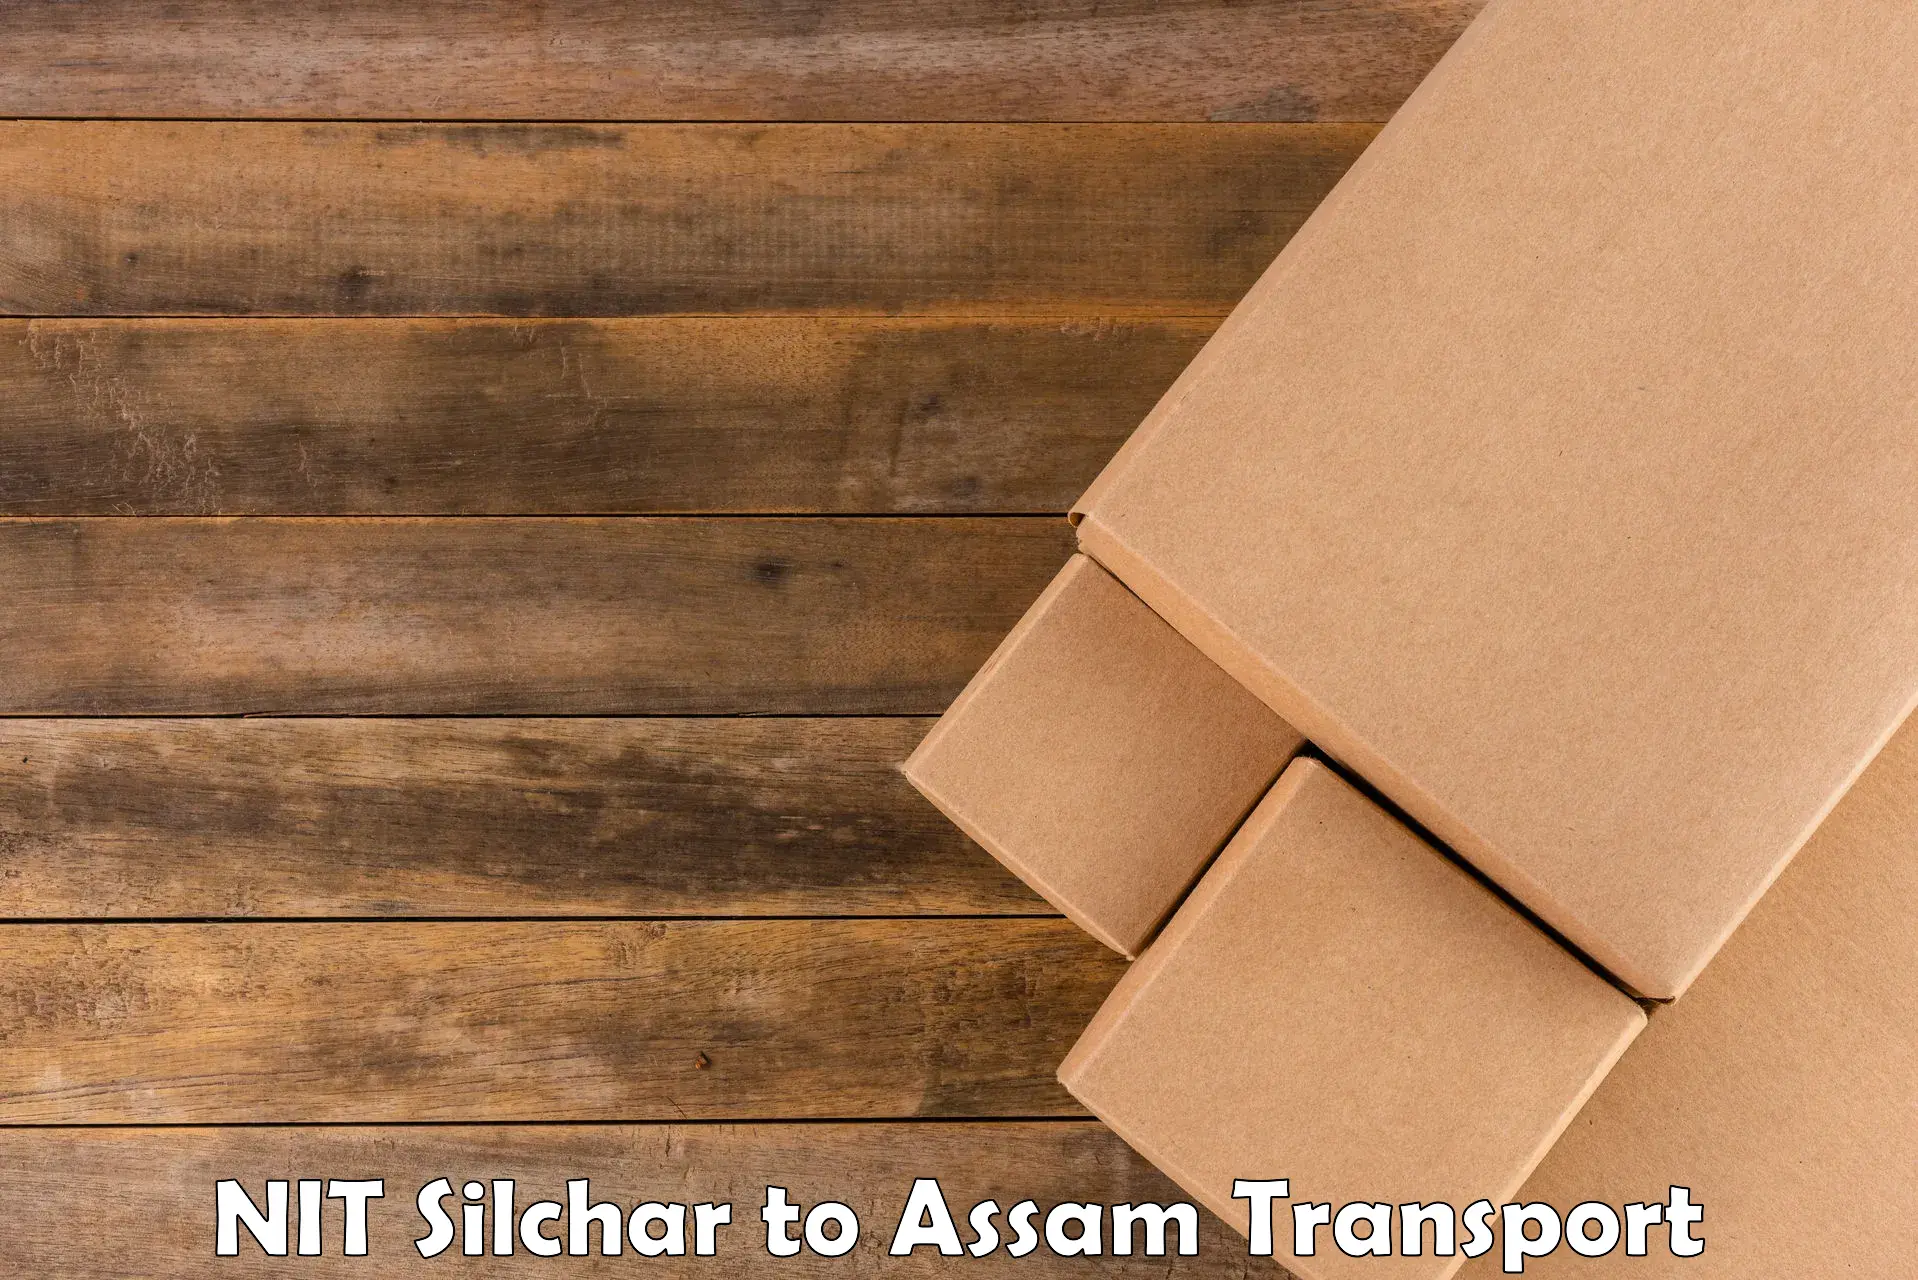 Air freight transport services NIT Silchar to Hojai Lanka